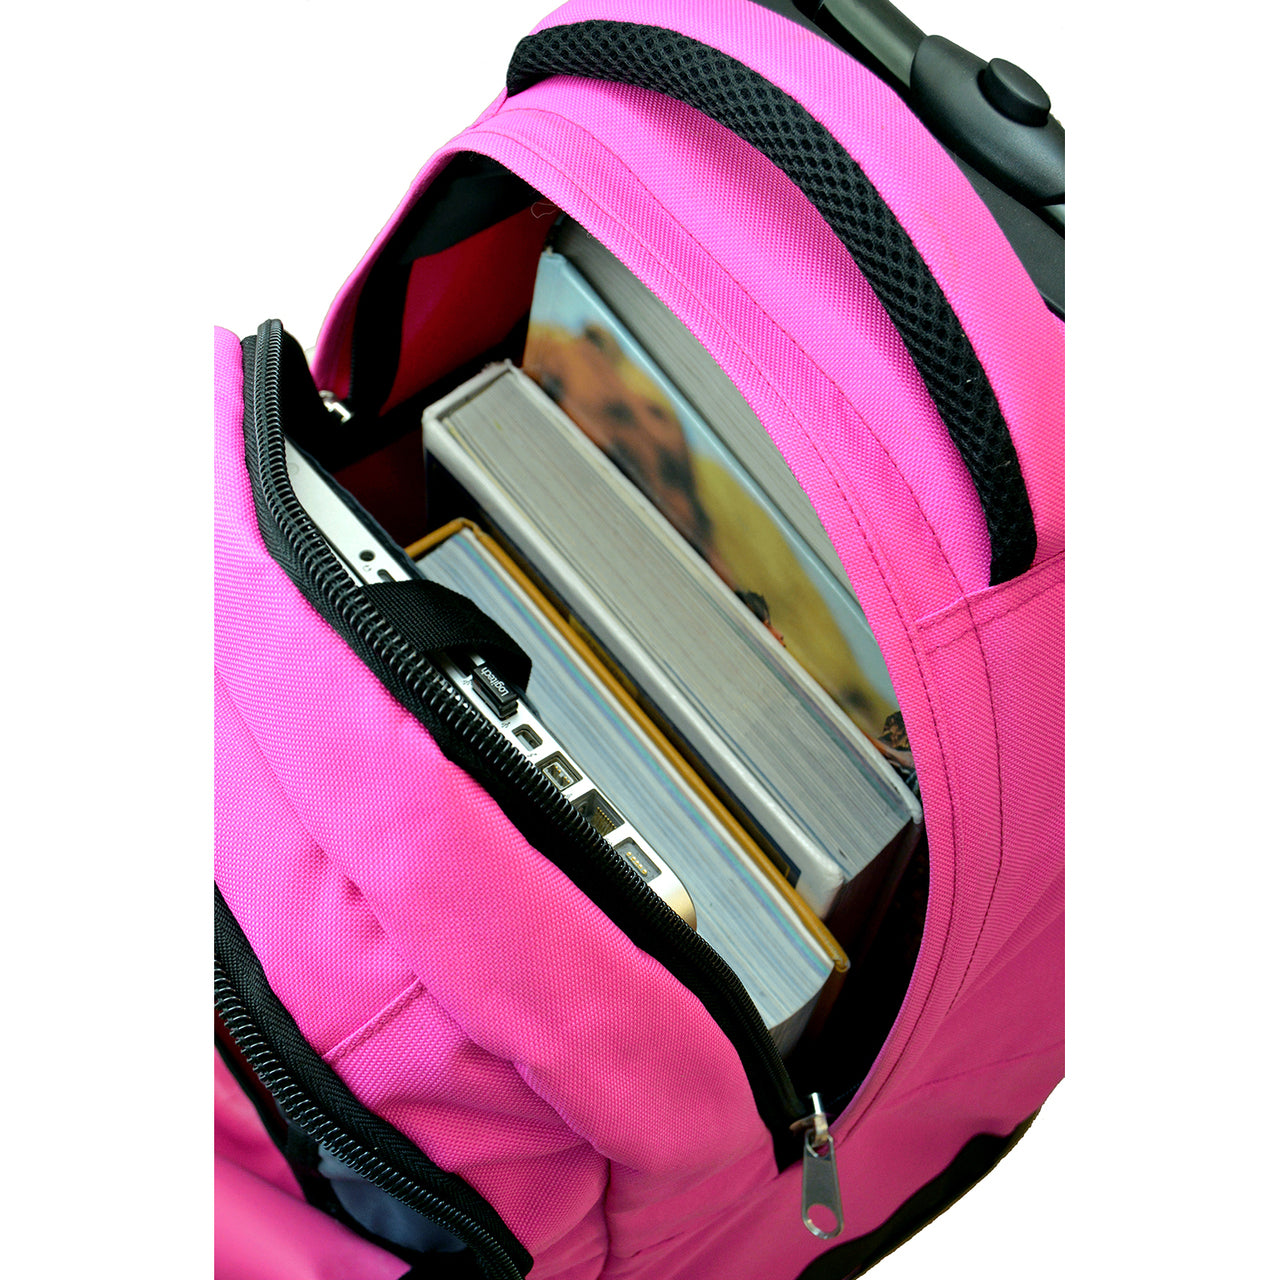 Detroit Lions Premium Wheeled Backpack in Pink